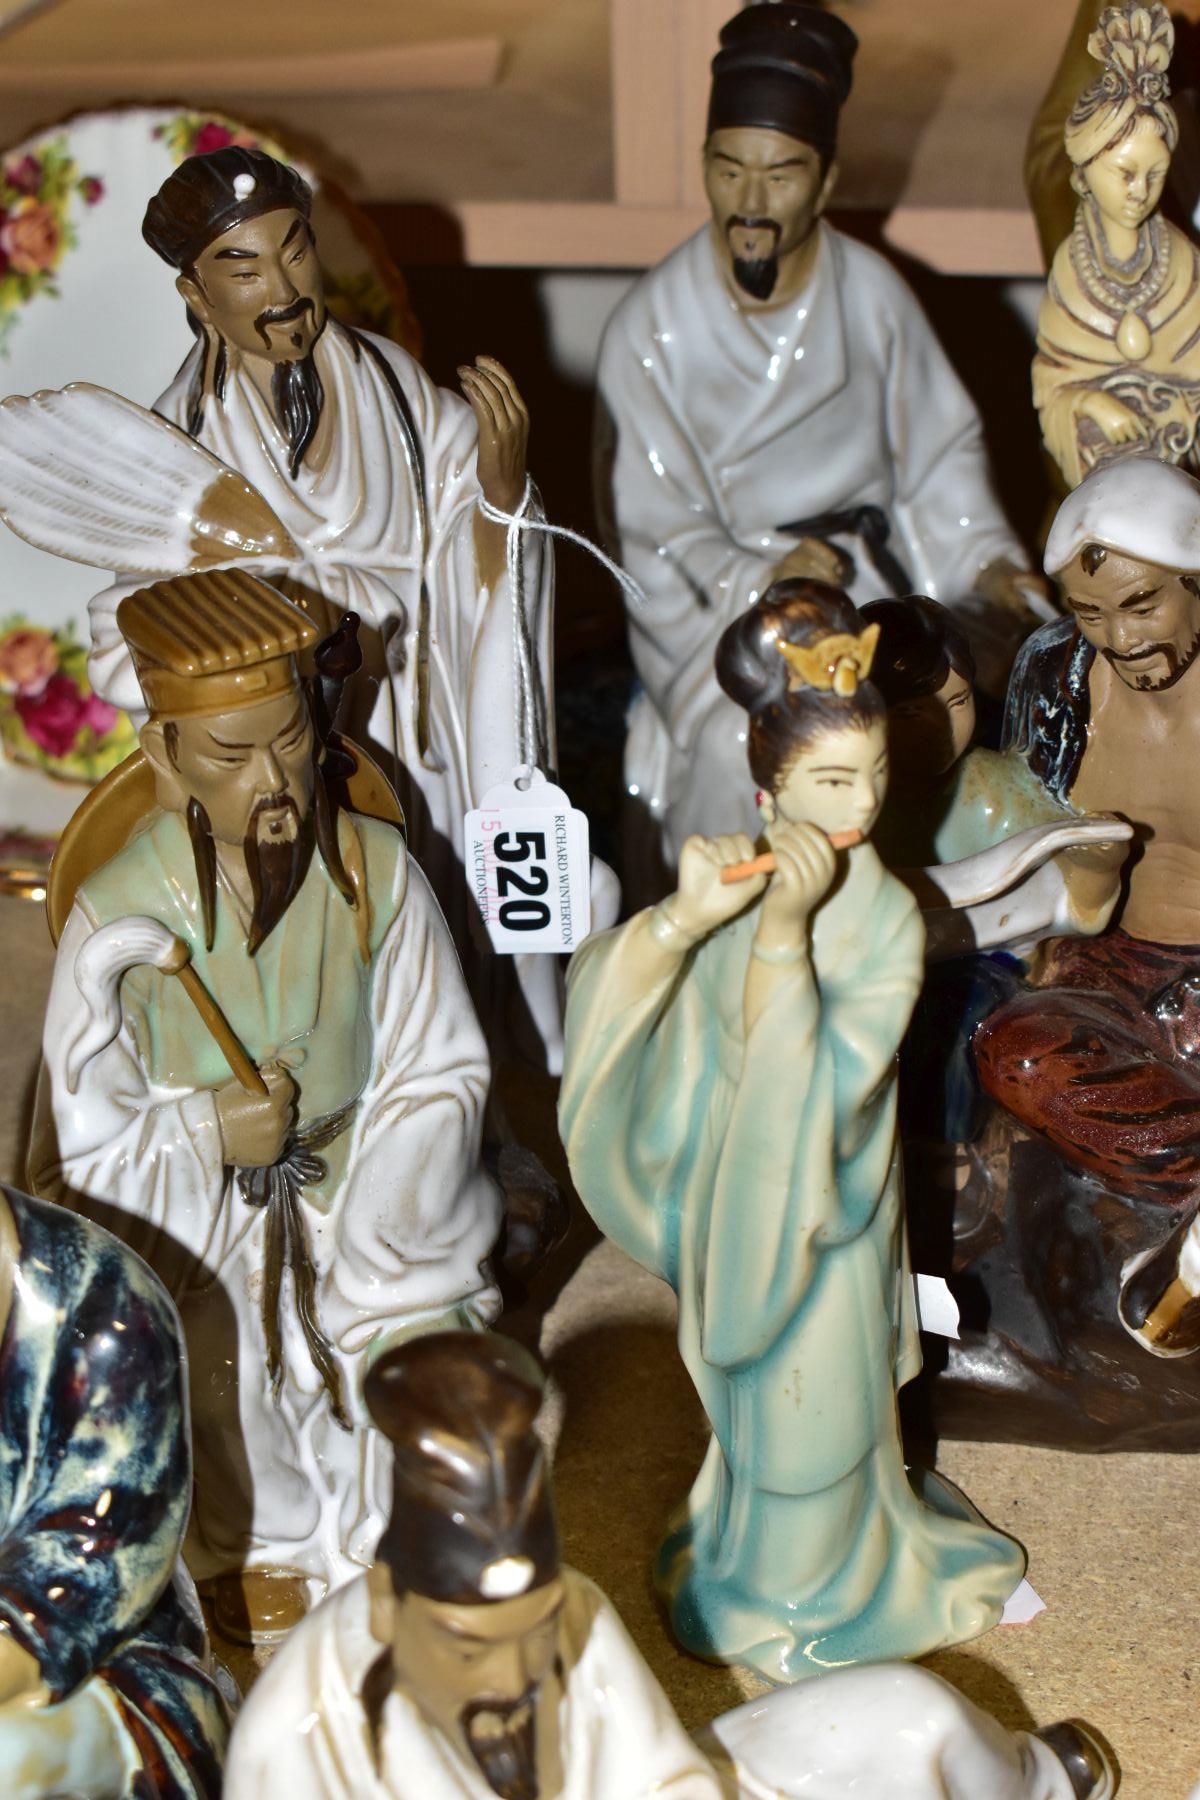 A GROUP OF MODERN ORIENTAL FIGURINES, to include fifteen figurines featuring people reading, fishing - Image 4 of 12